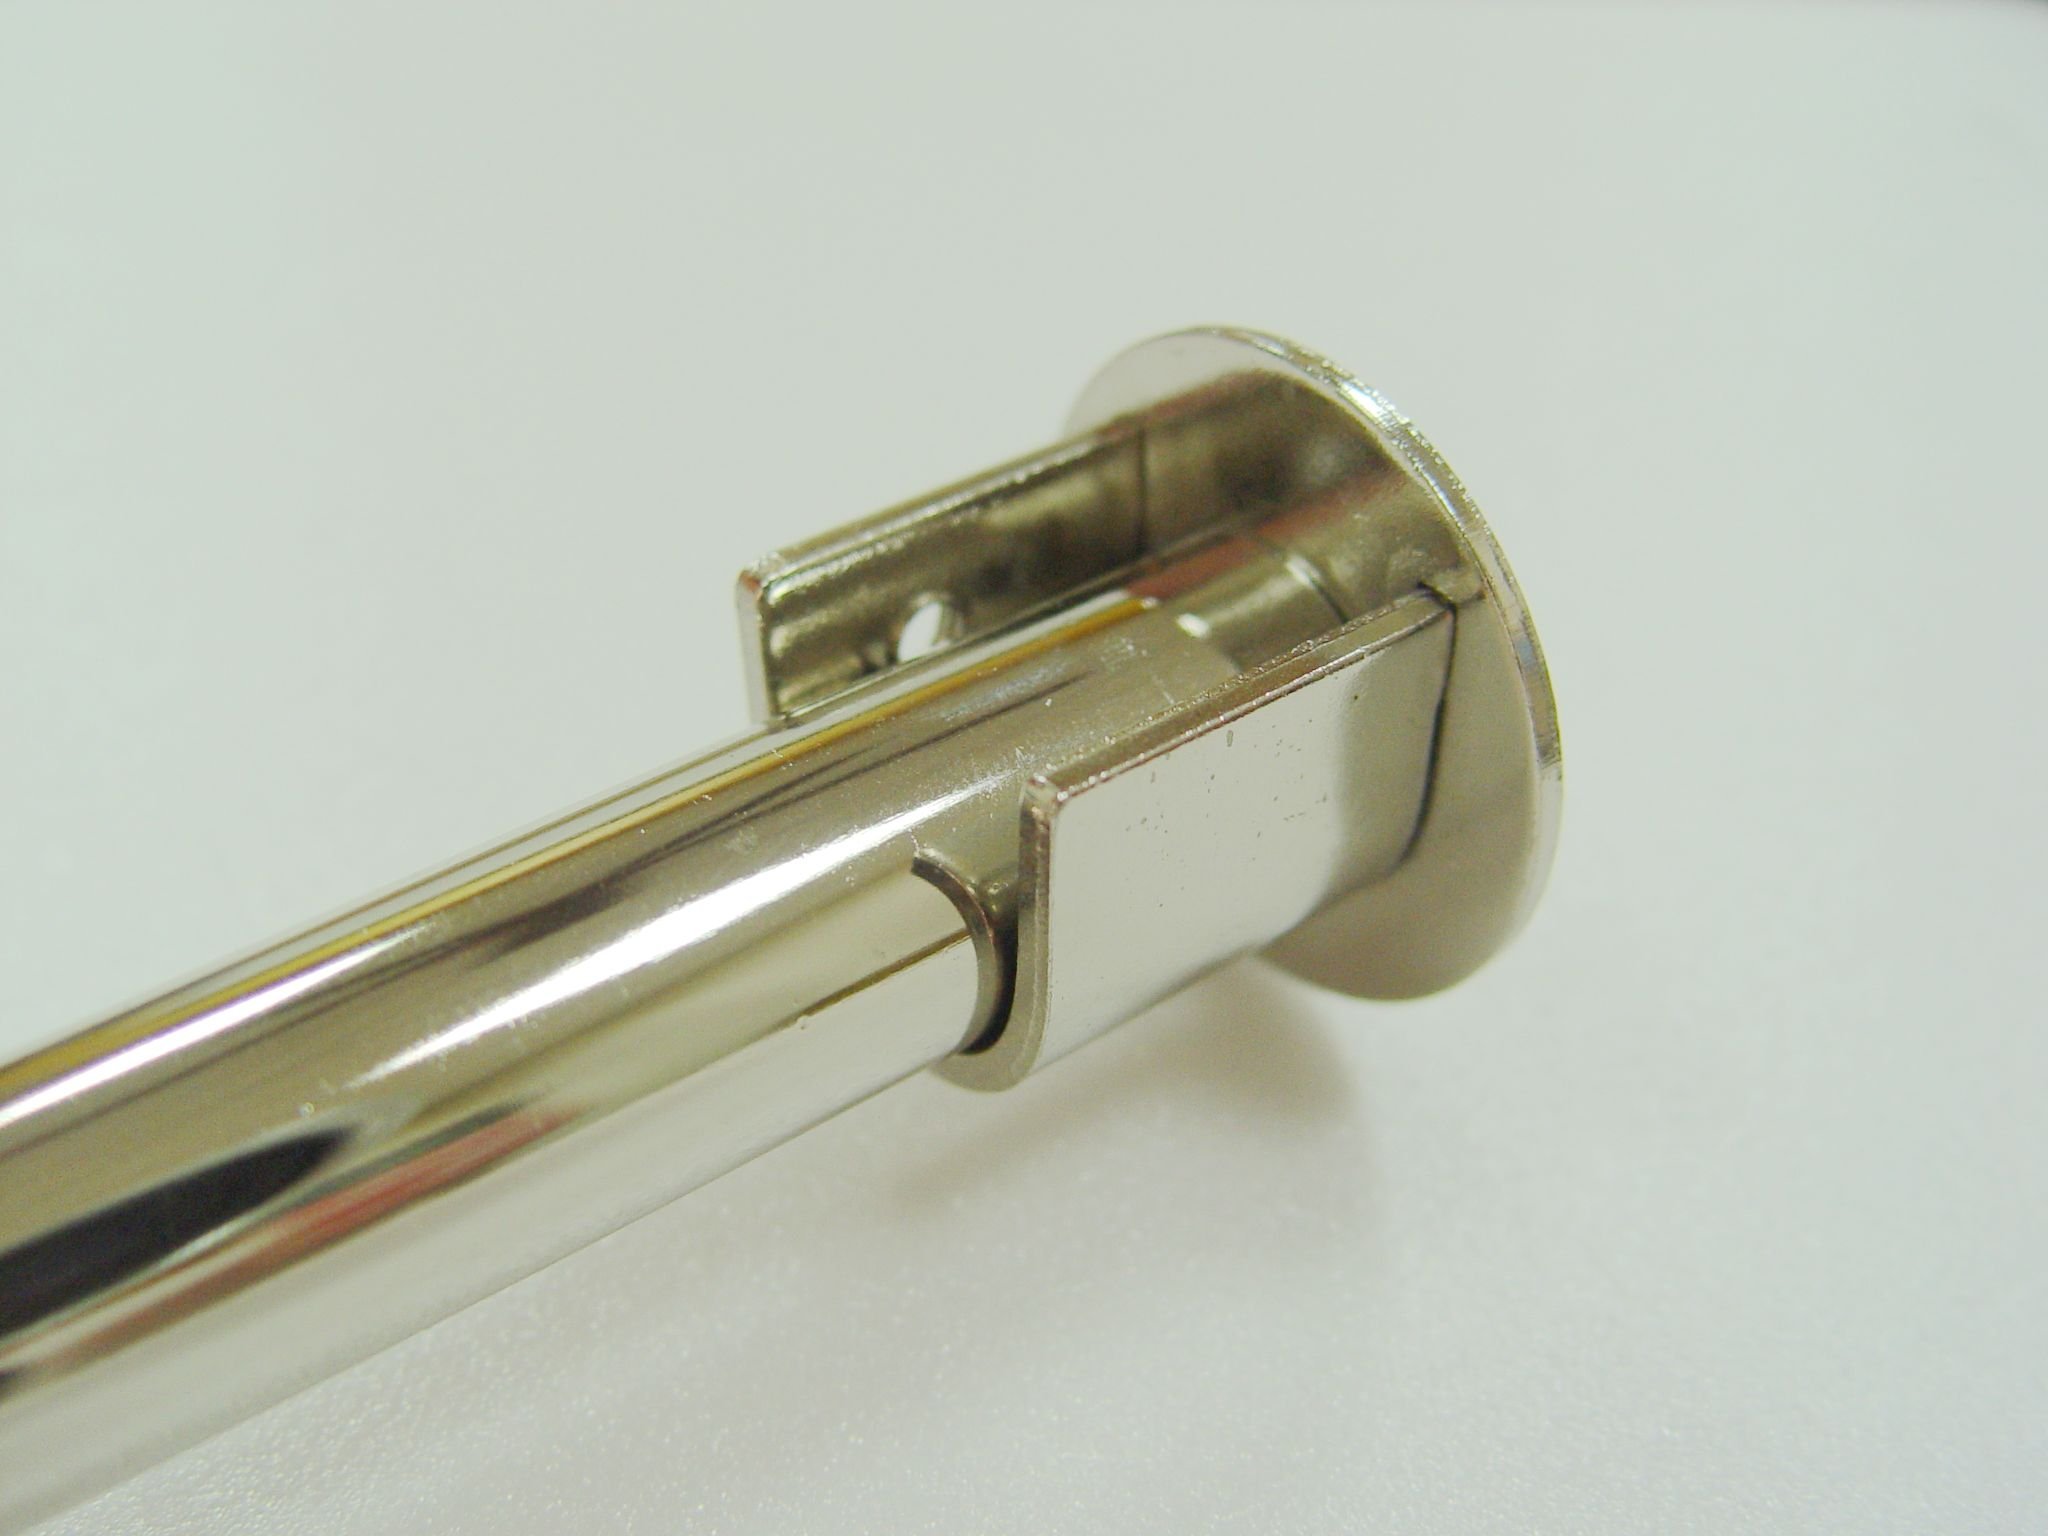 A professional manufacturer of window hardware, bathroom hardware and tie  down.